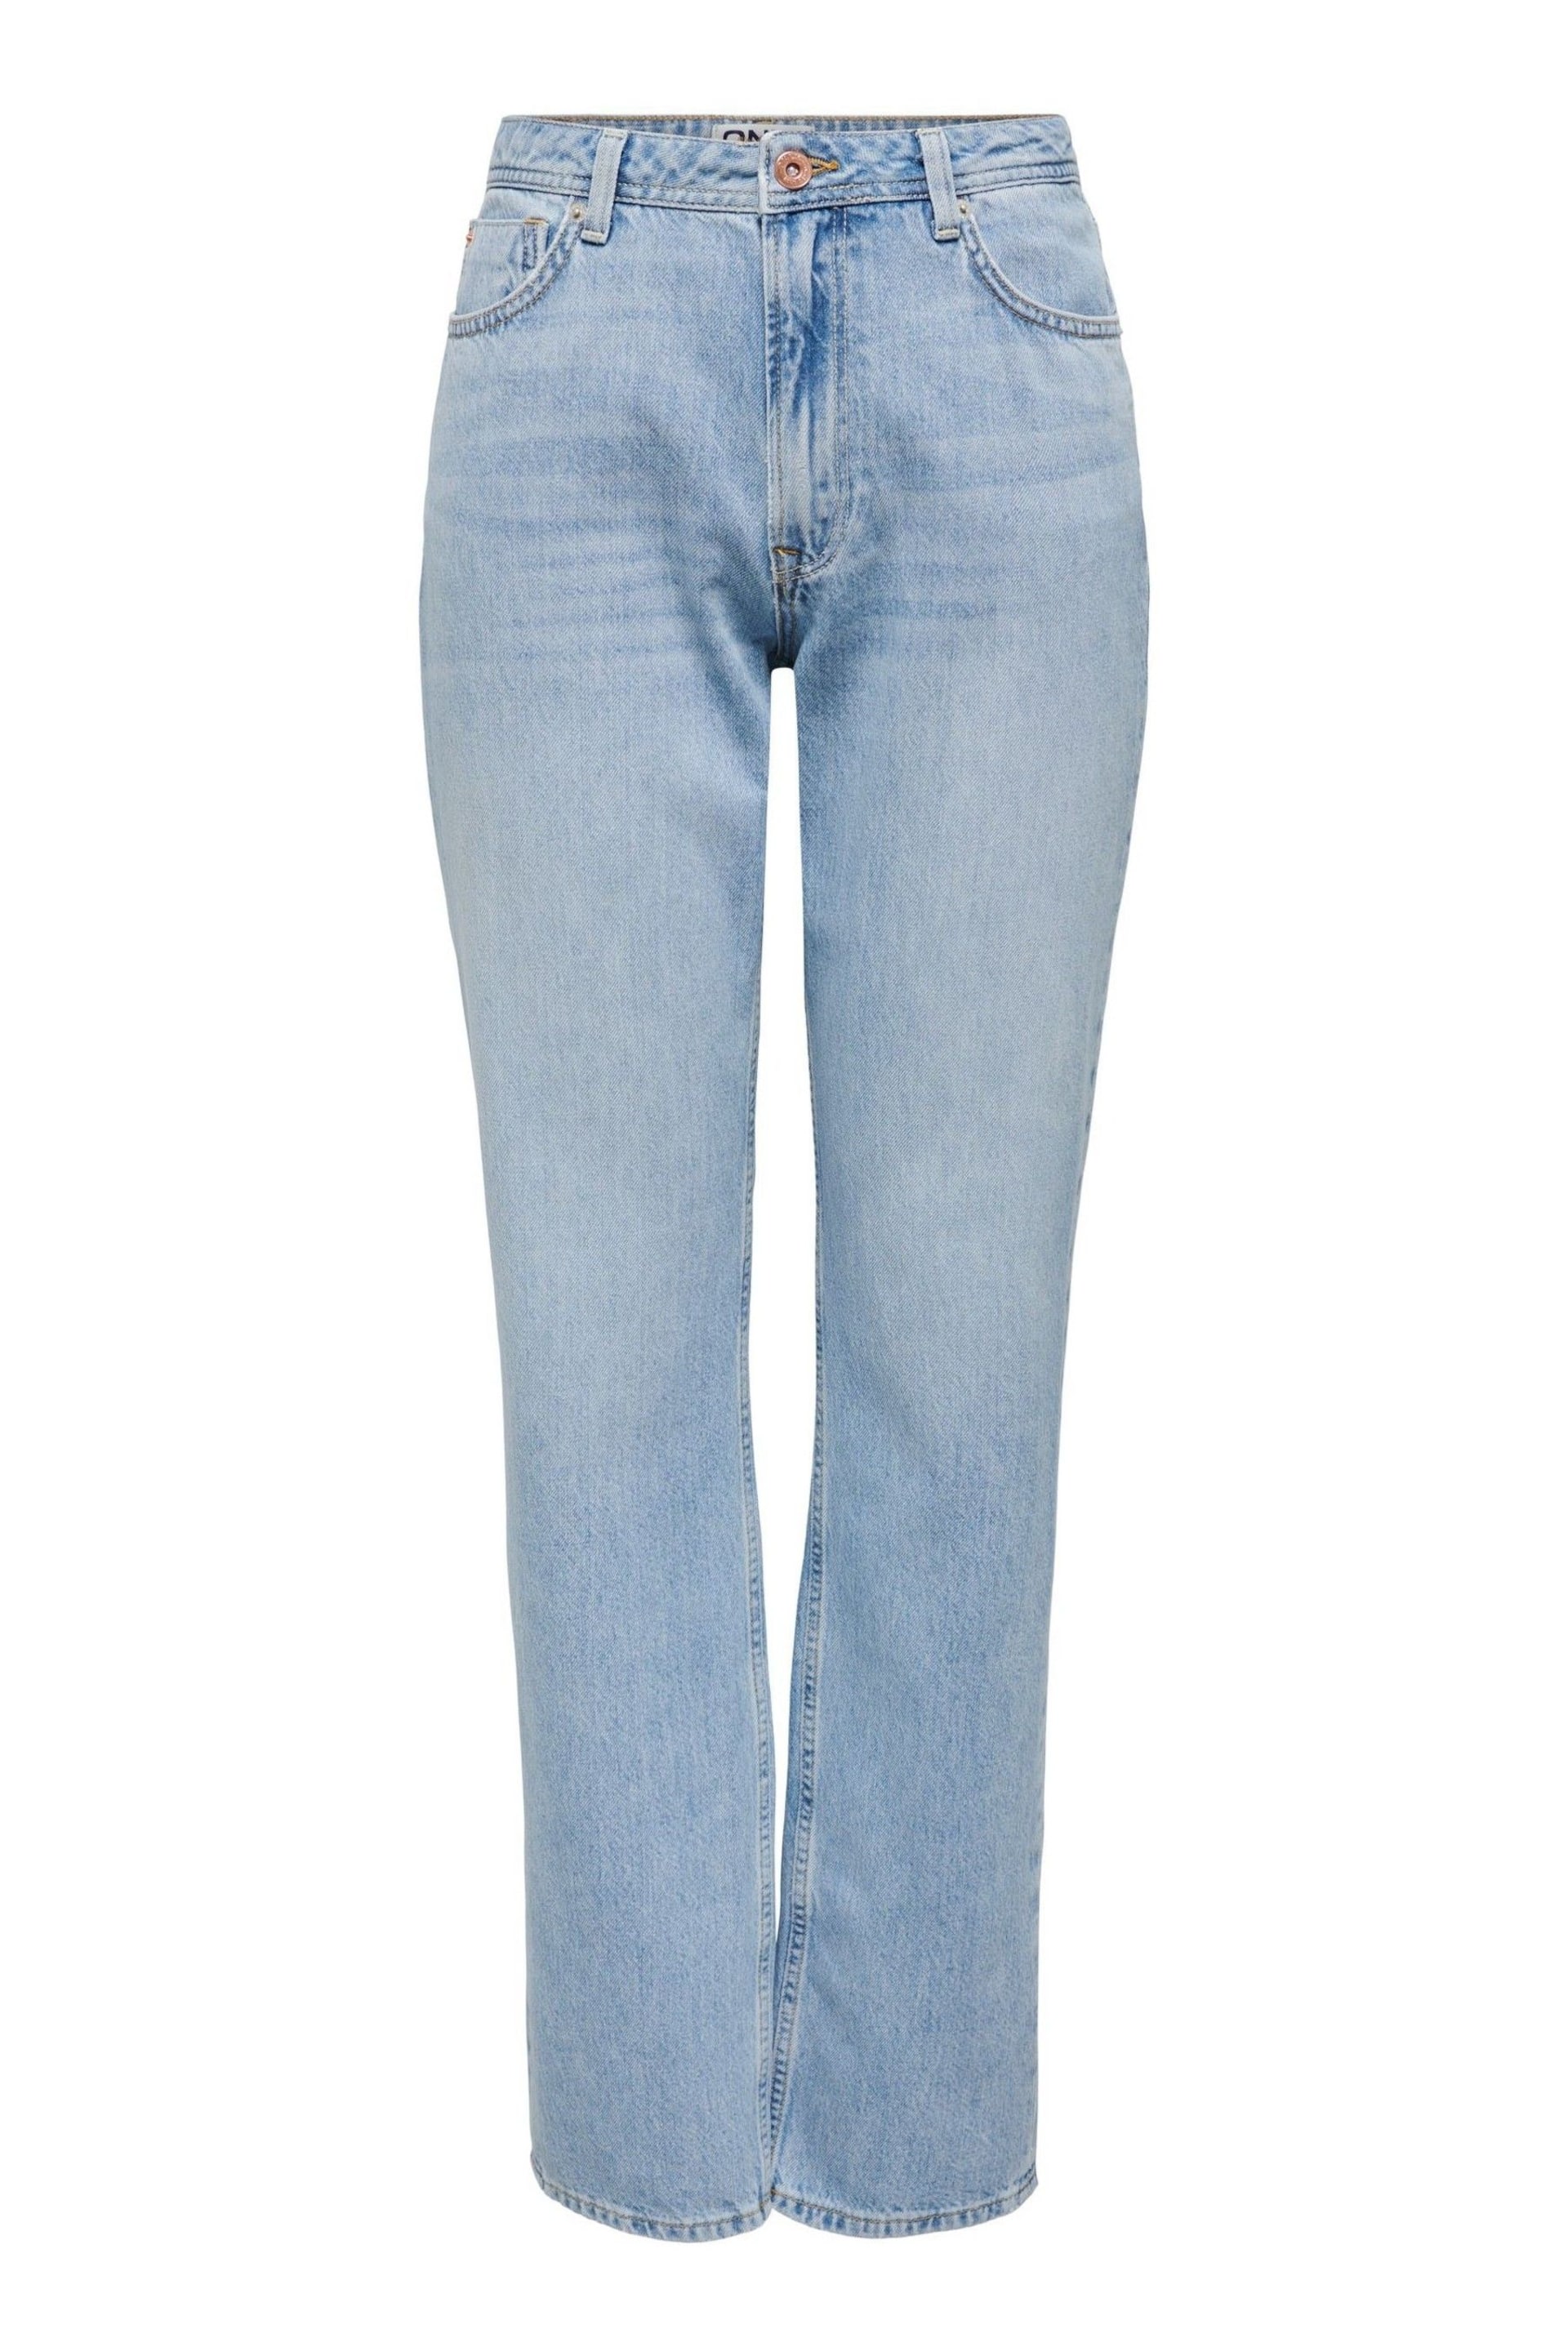 ONLY Blue High Waisted Straight Leg Jeans - Image 6 of 7